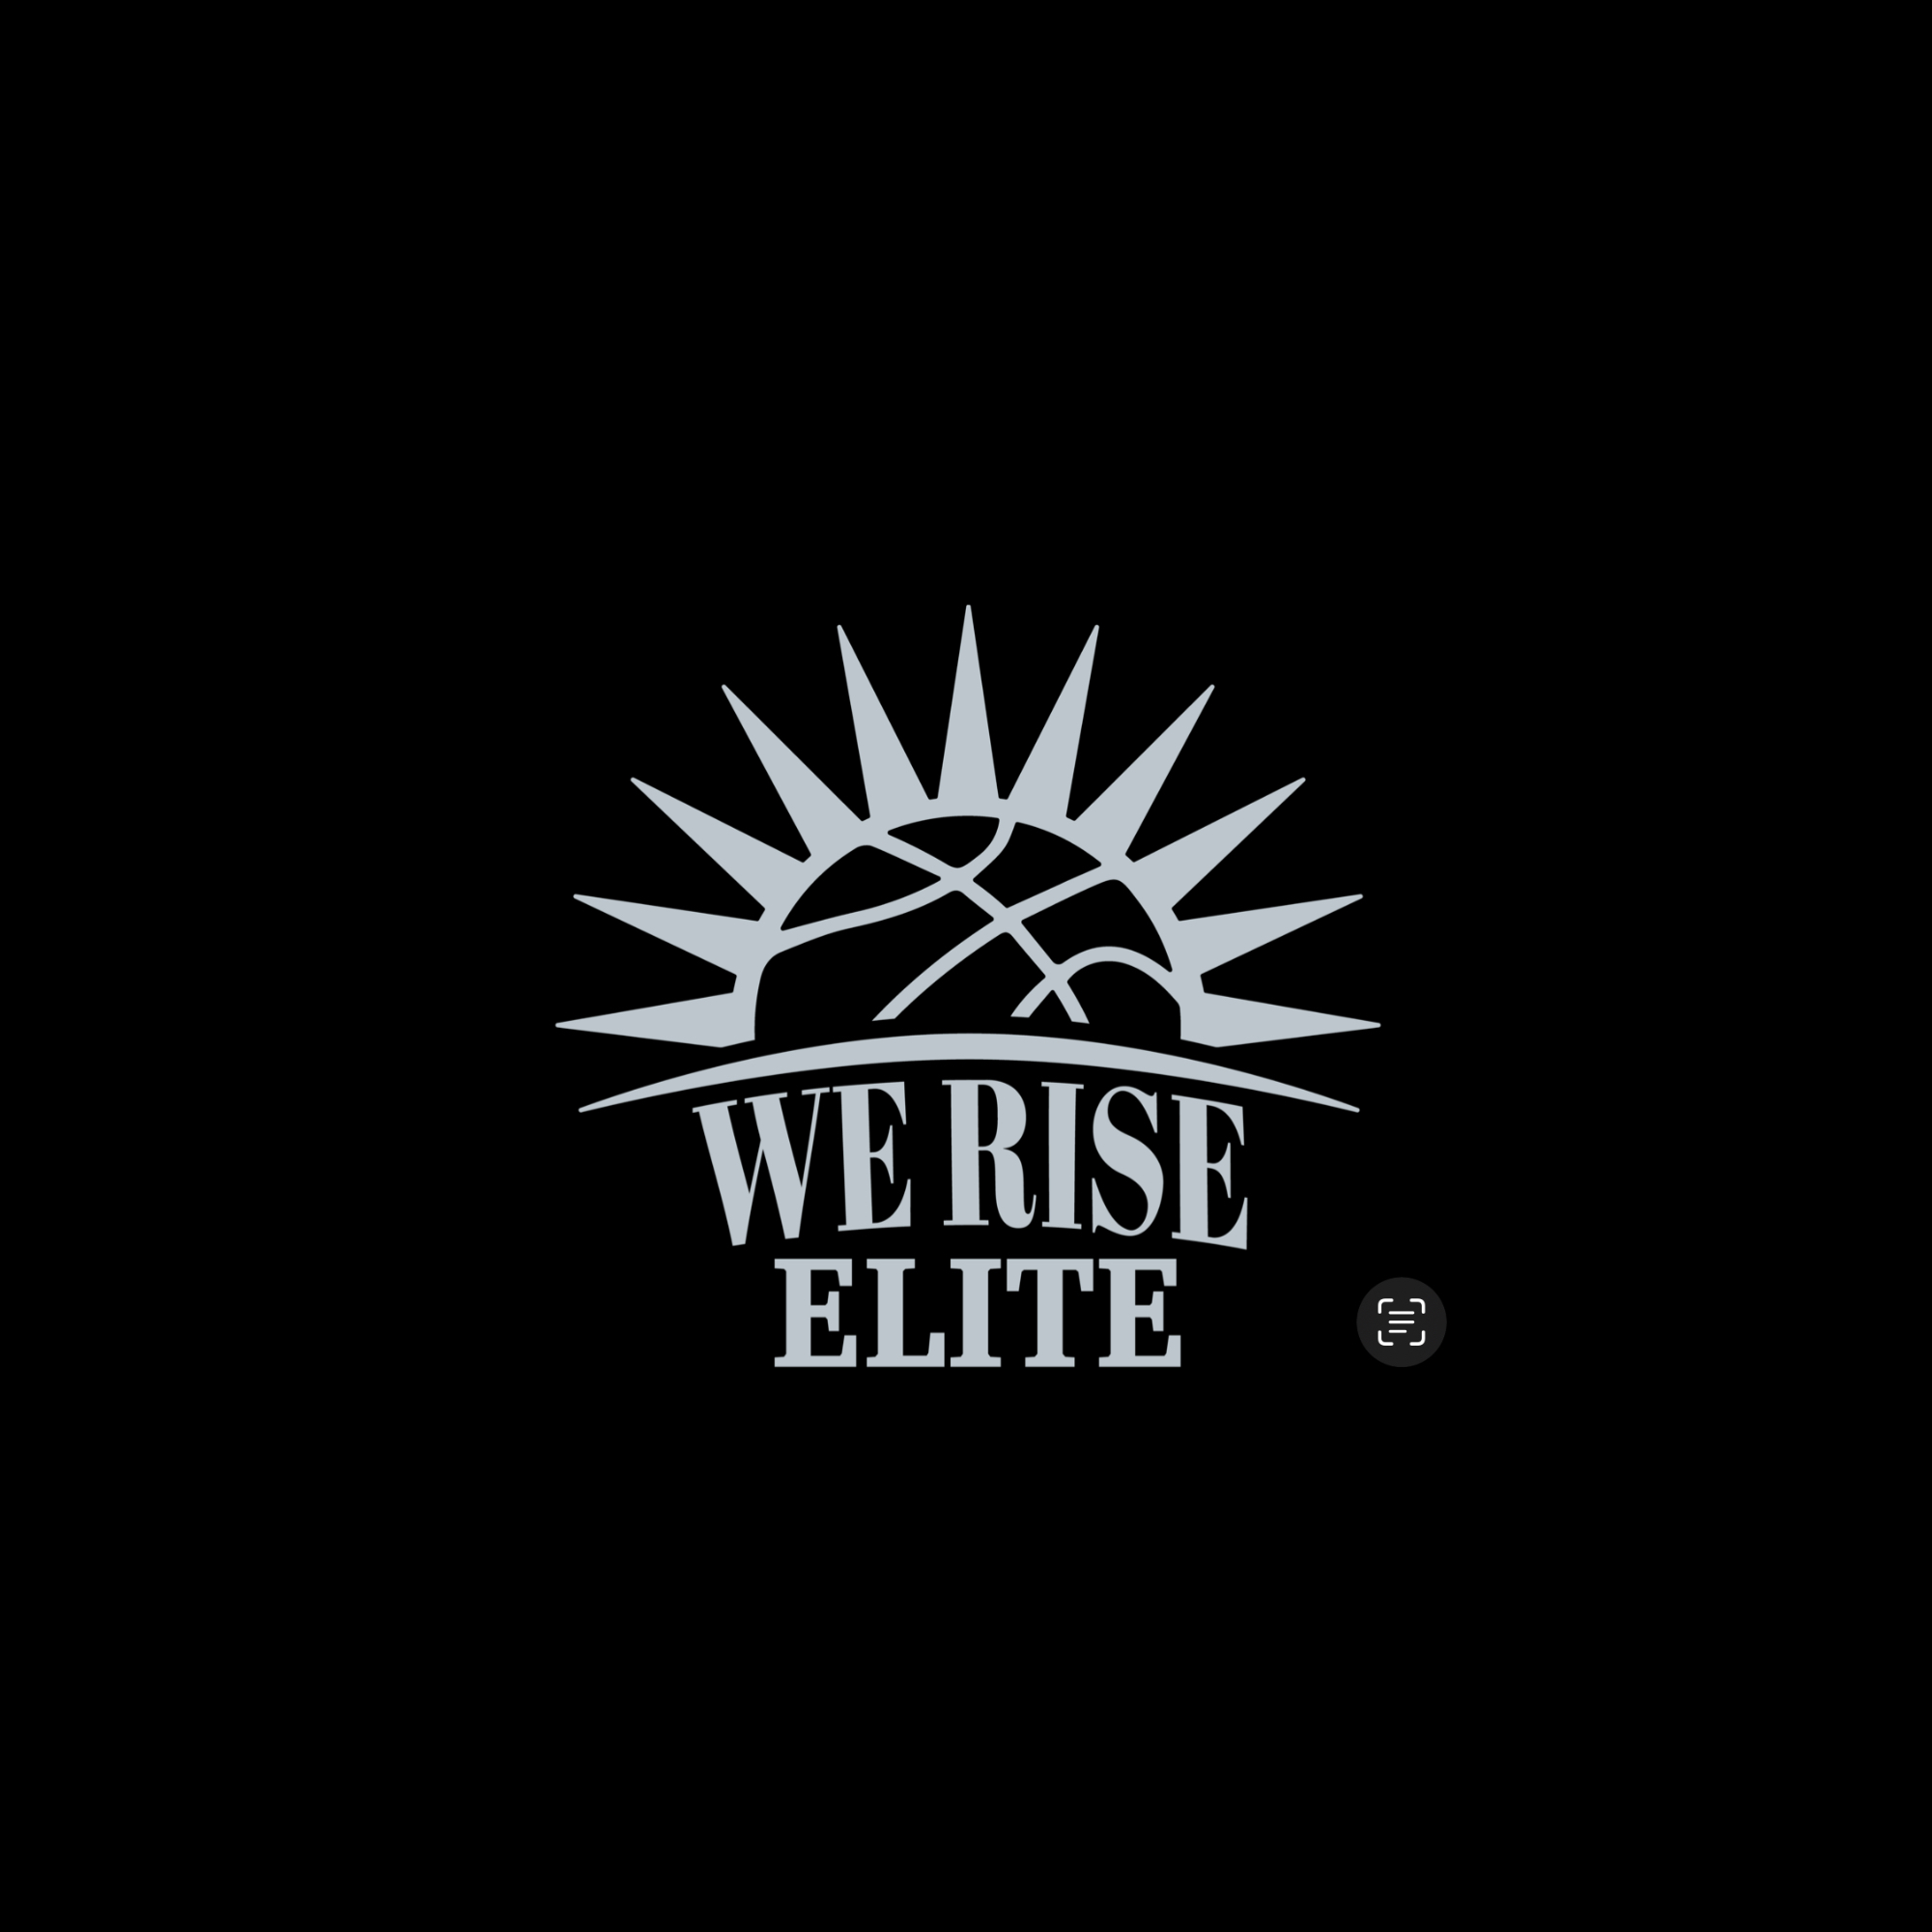 The official logo of We Rise Elite